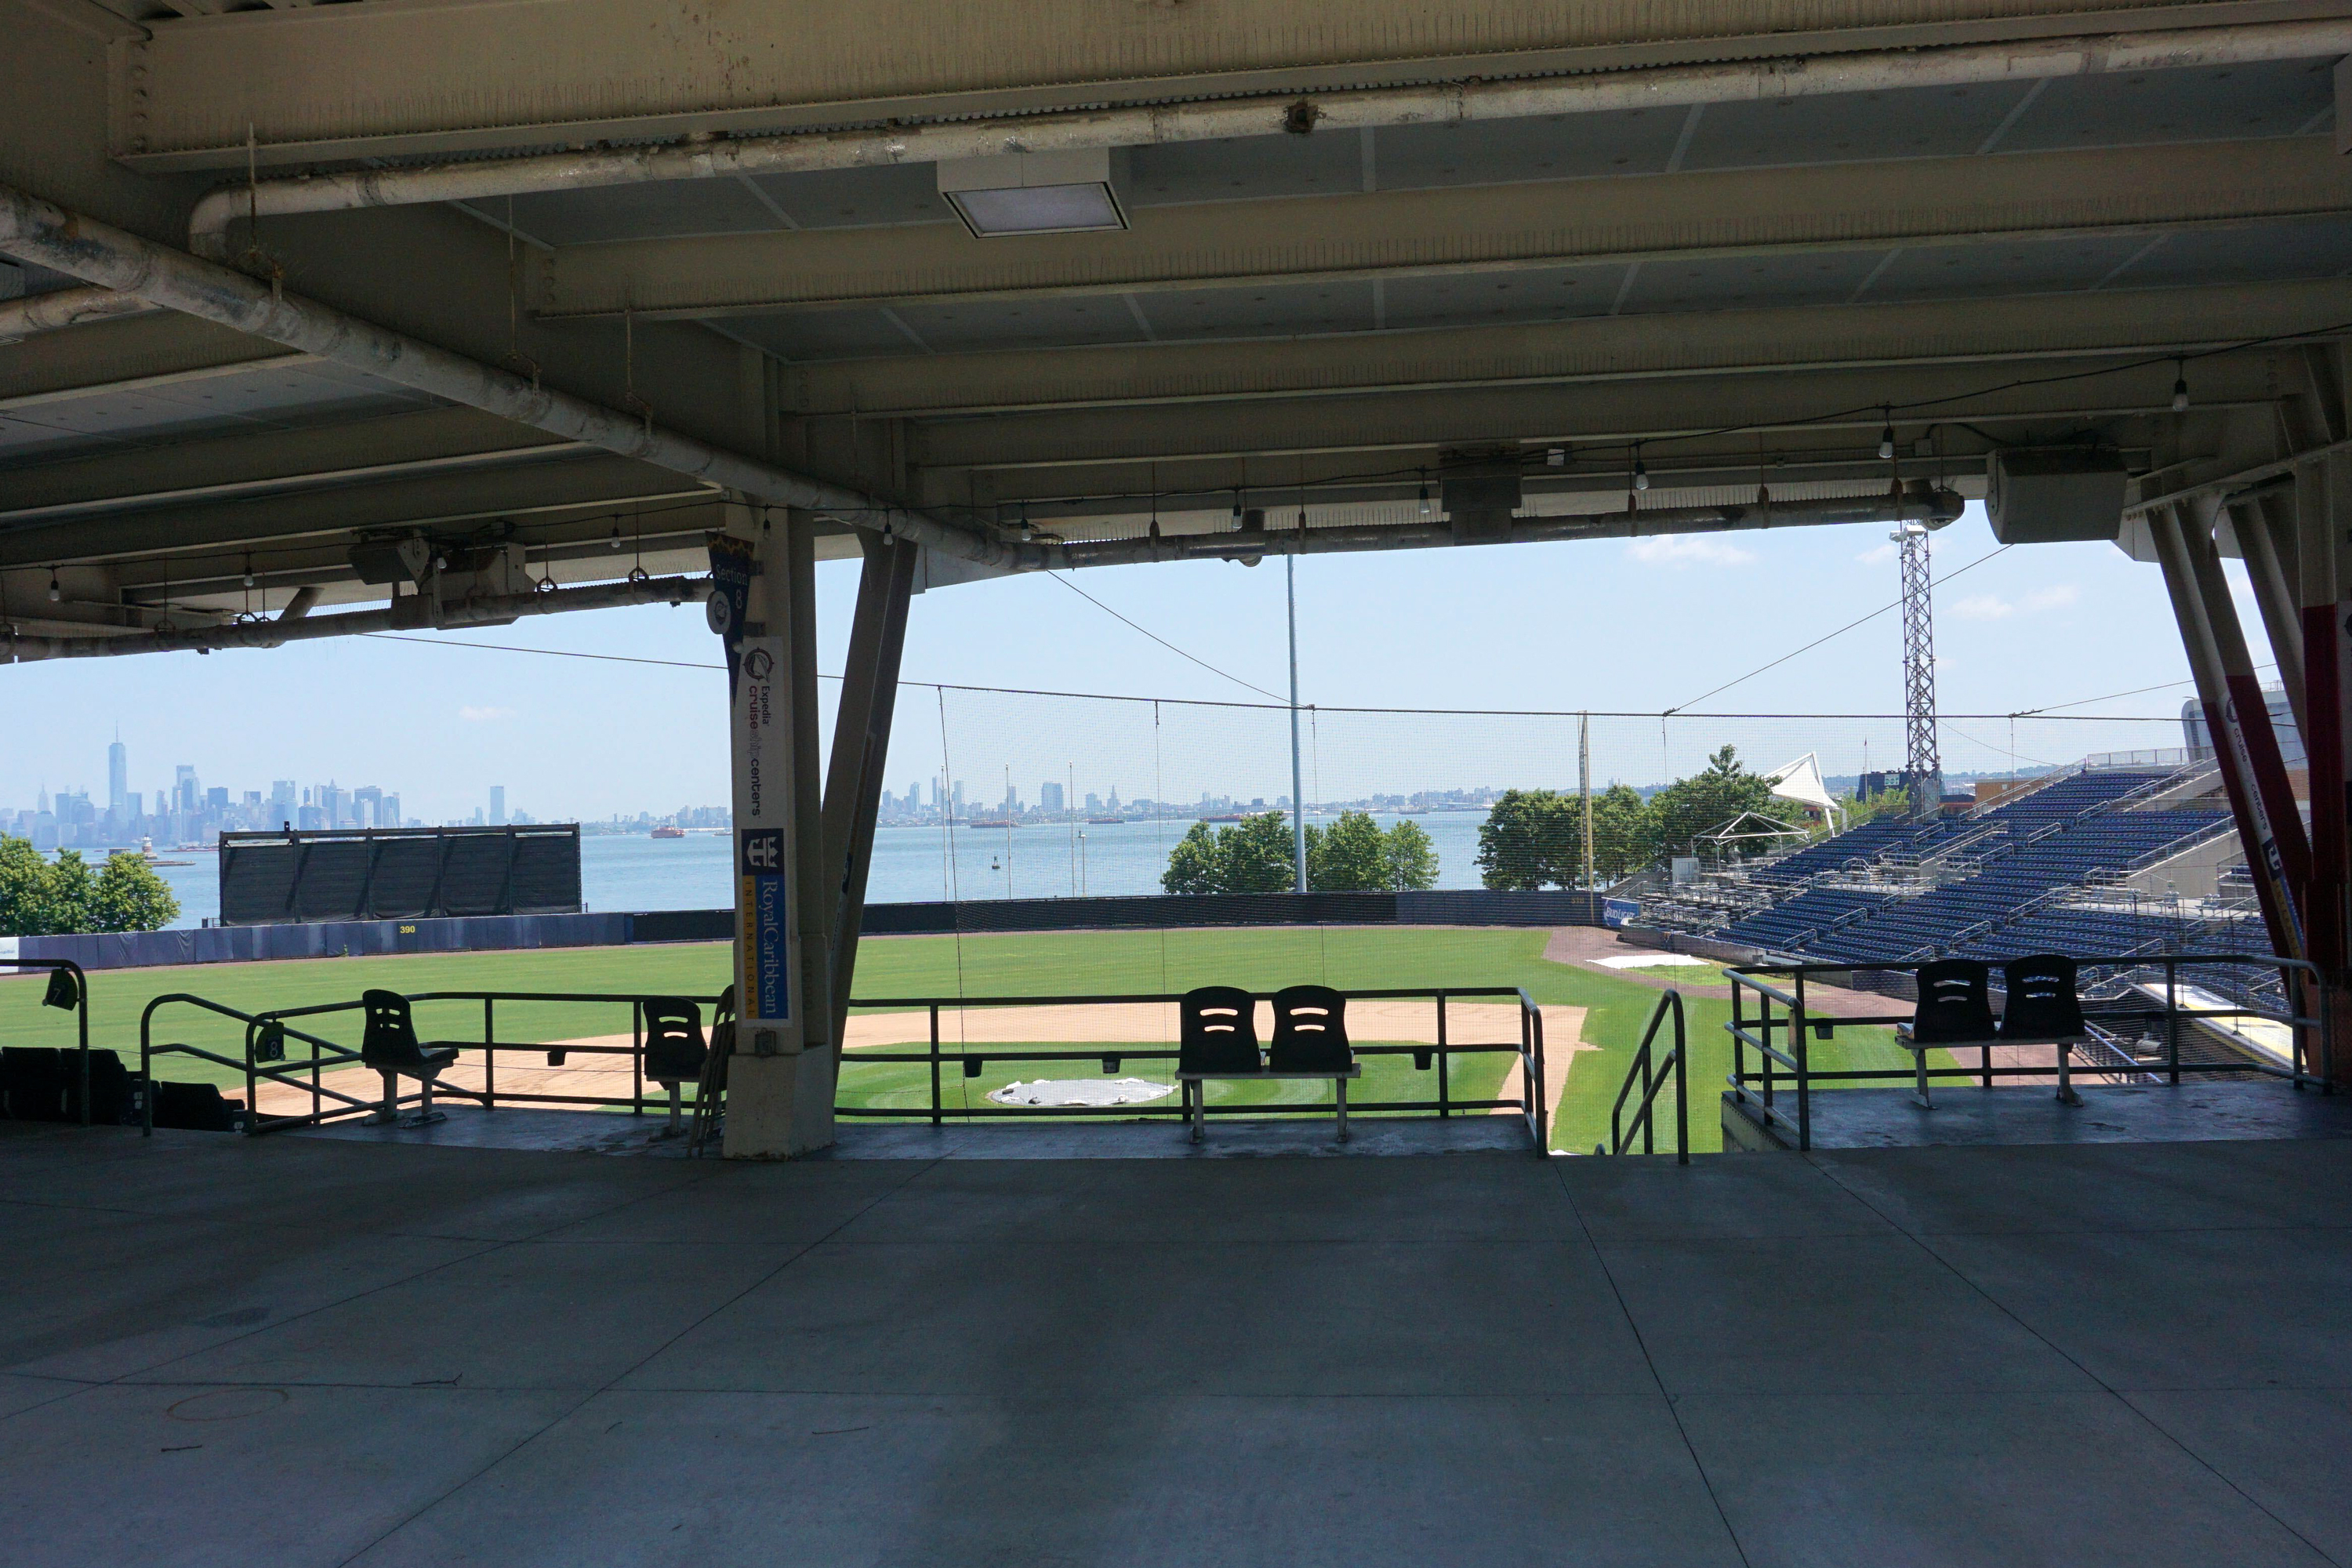 Richmond County Bank Ballpark, a stadium near the Staten Island Ferry Terminal which leases land from New York City, July 2, 2020.